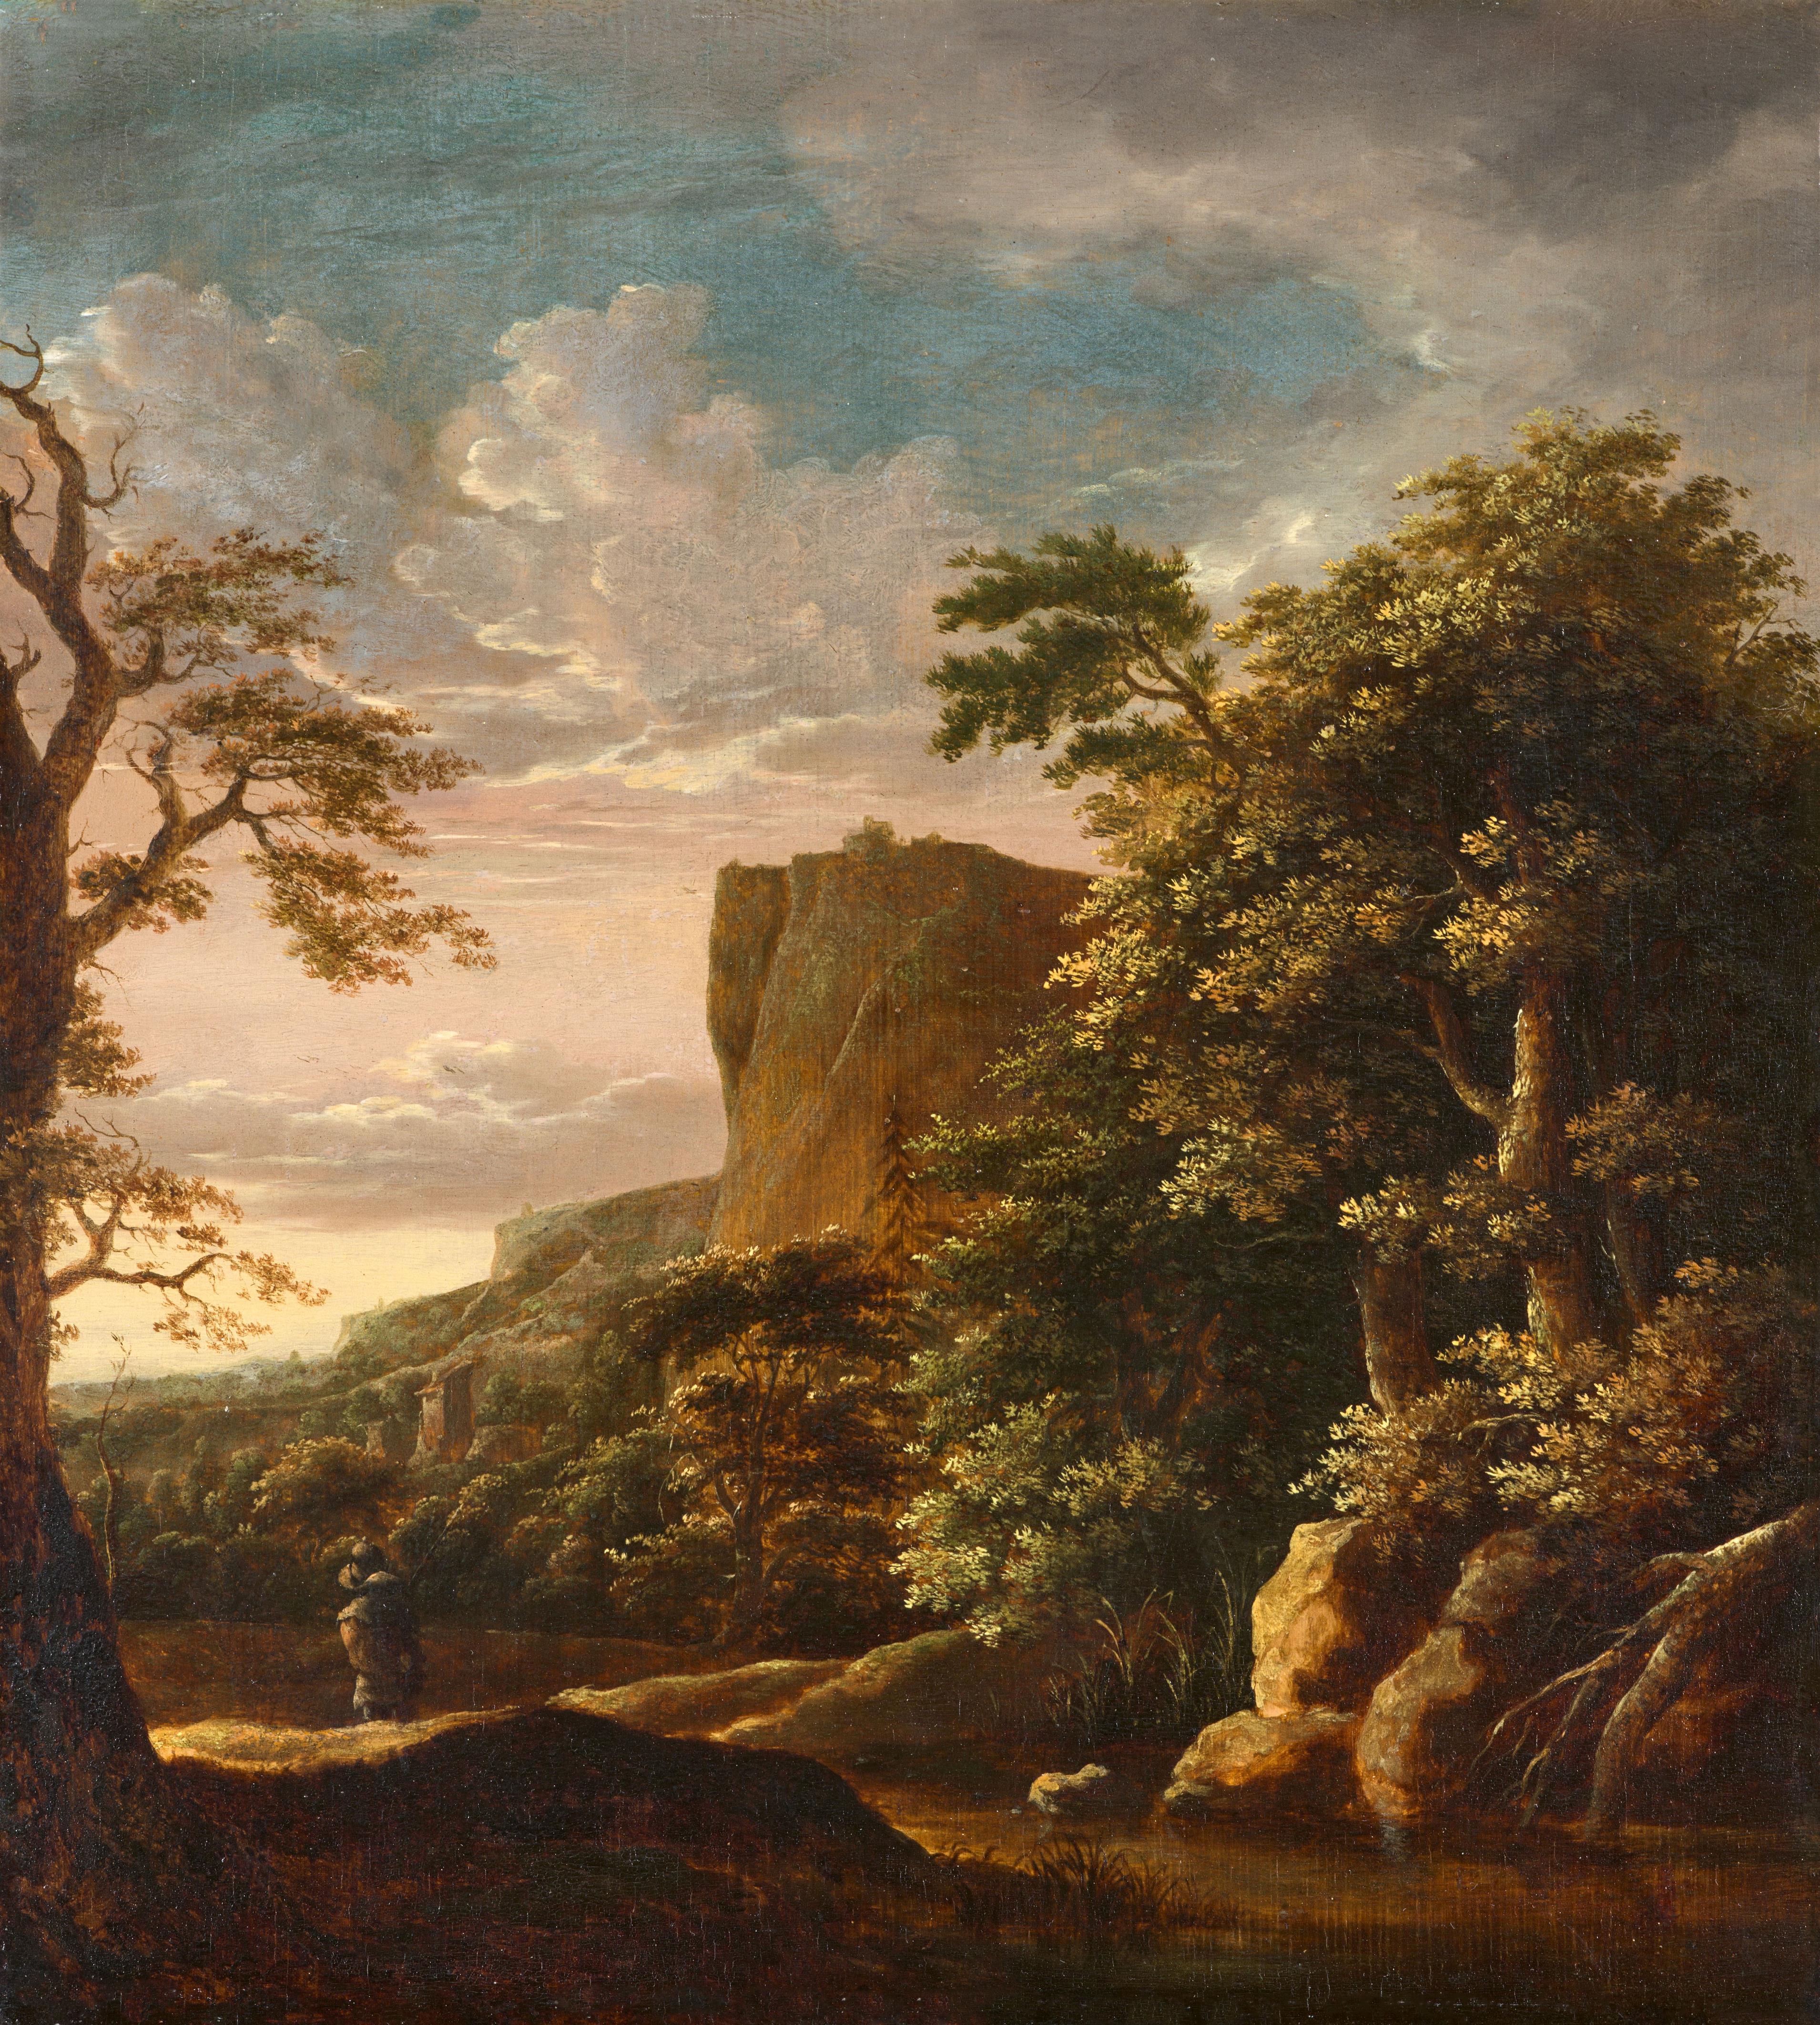 Cornelis Matthieu - Southern Landscape with a River and a Traveller - image-1